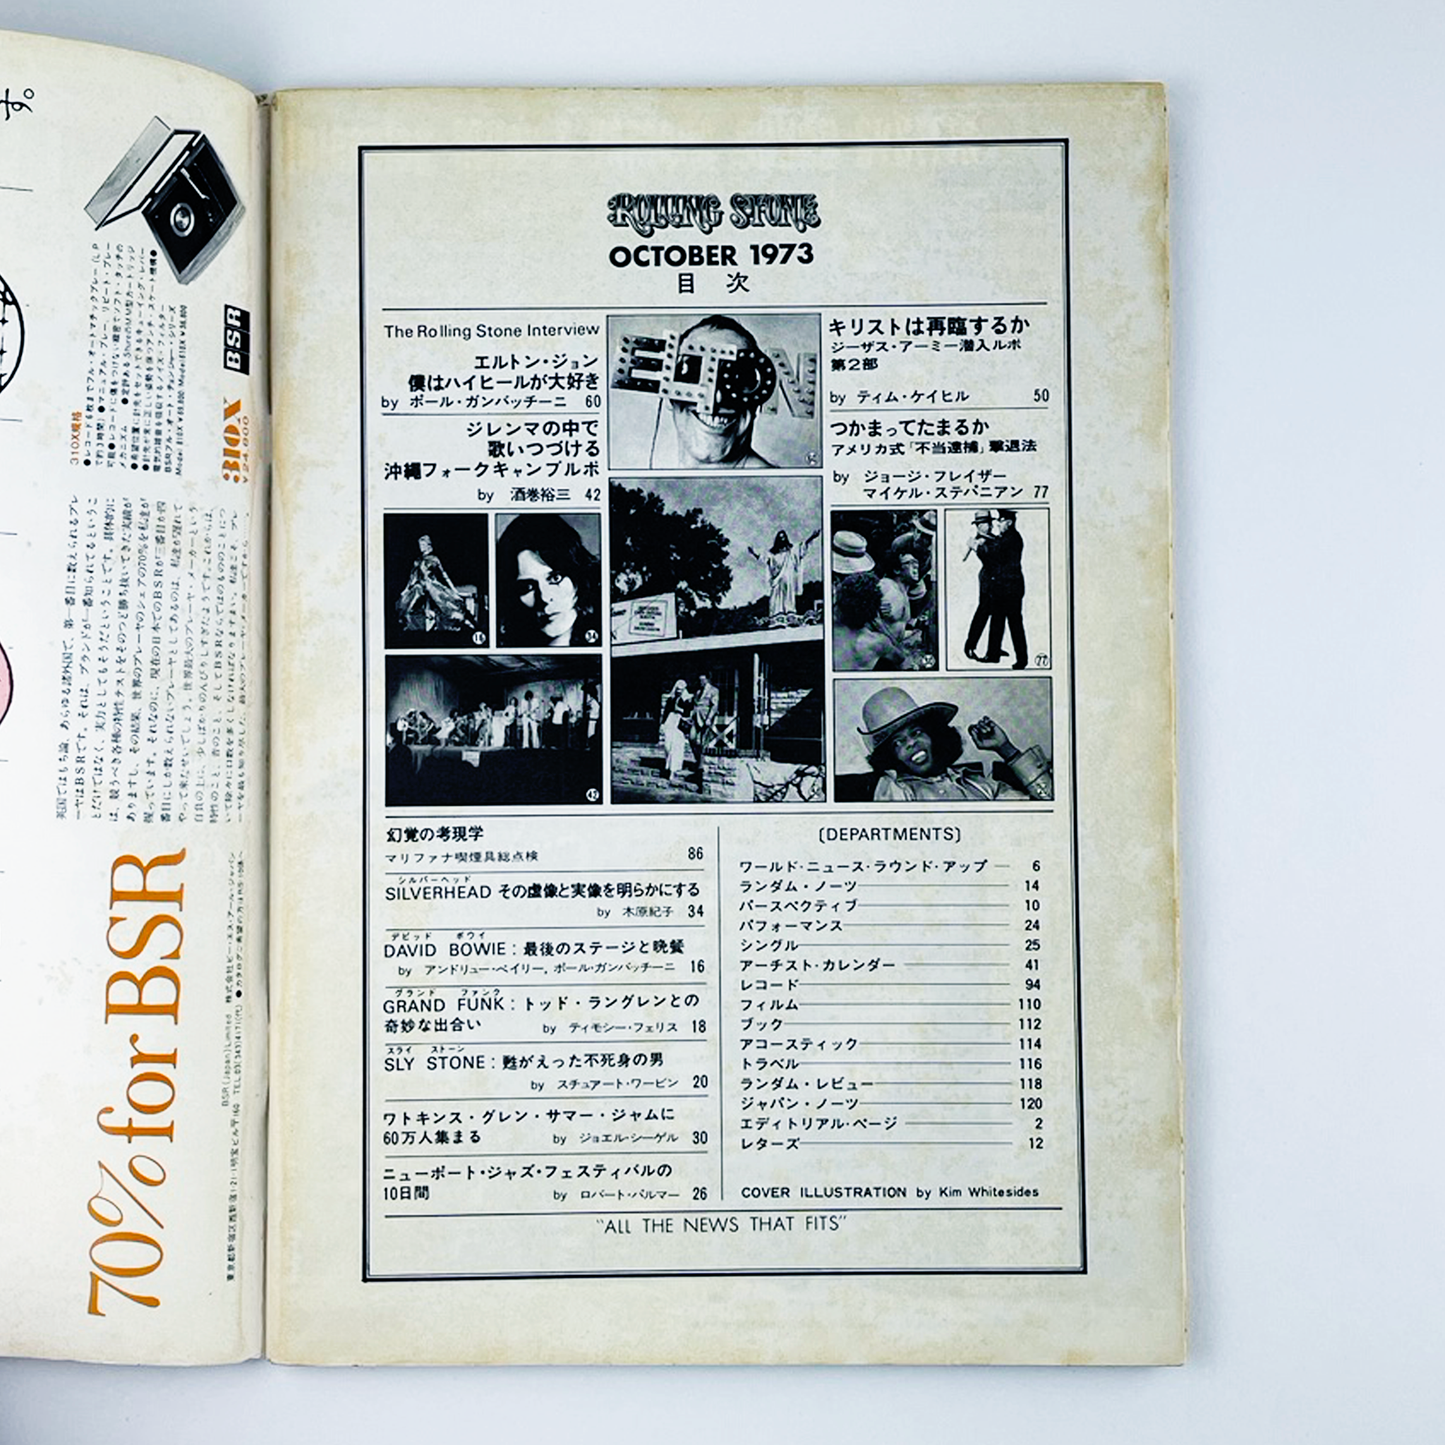 ROLLING STONE 1973 OCTOBER 10  昭和48年10月 | ROLLING STONE編集部